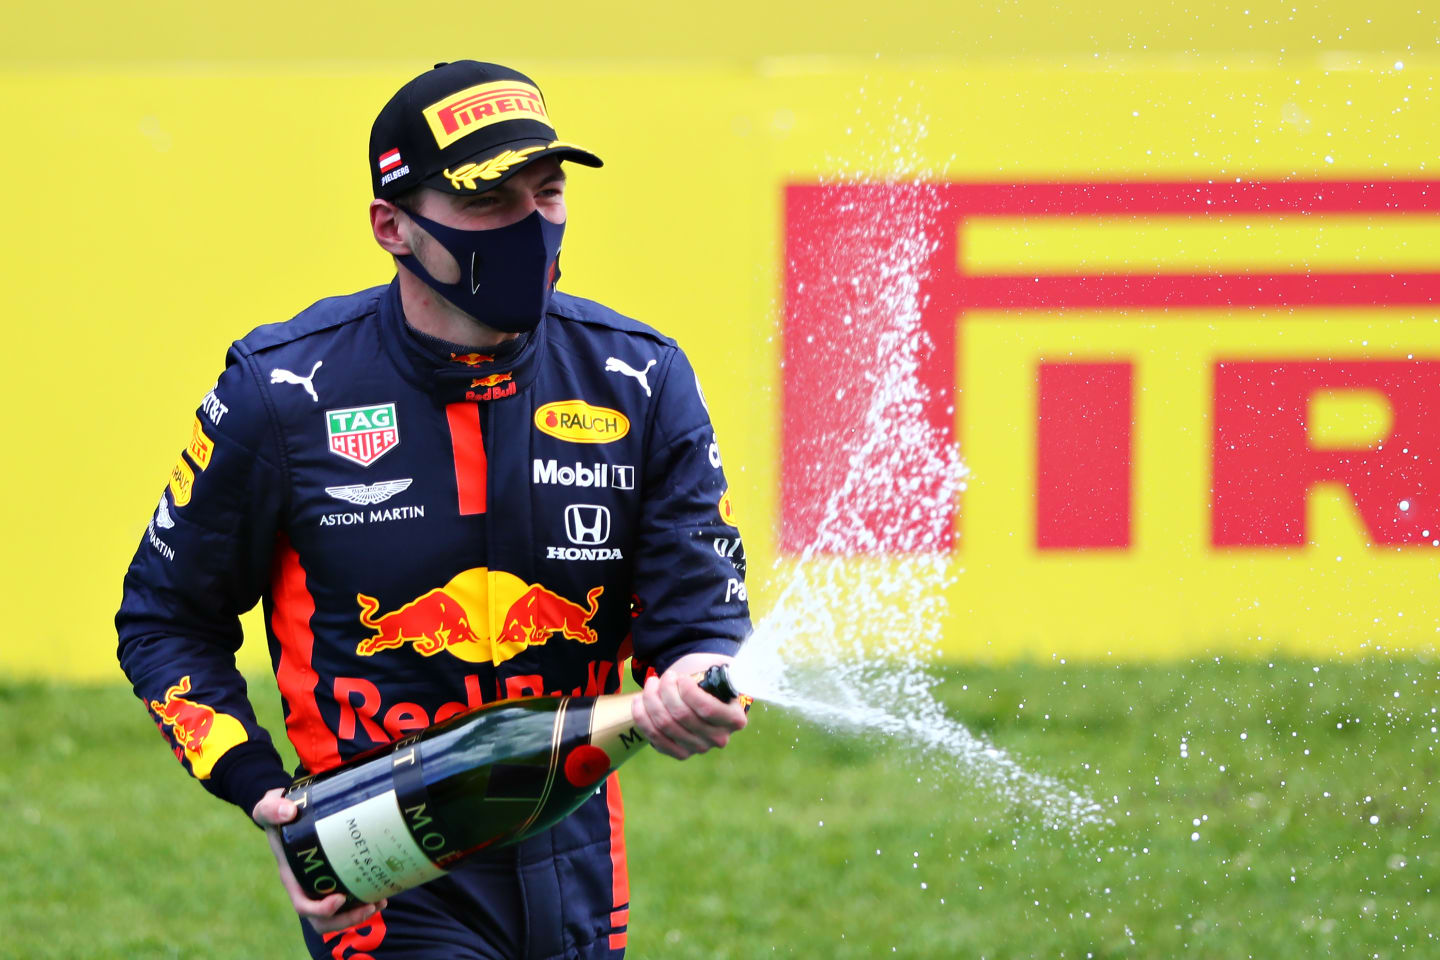 SPIELBERG, AUSTRIA - JULY 12: Third placed Max Verstappen of Netherlands and Red Bull Racing celebrates on the podium during the Formula One Grand Prix of Styria at Red Bull Ring on July 12, 2020 in Spielberg, Austria. (Photo by Getty Images/Getty Images)